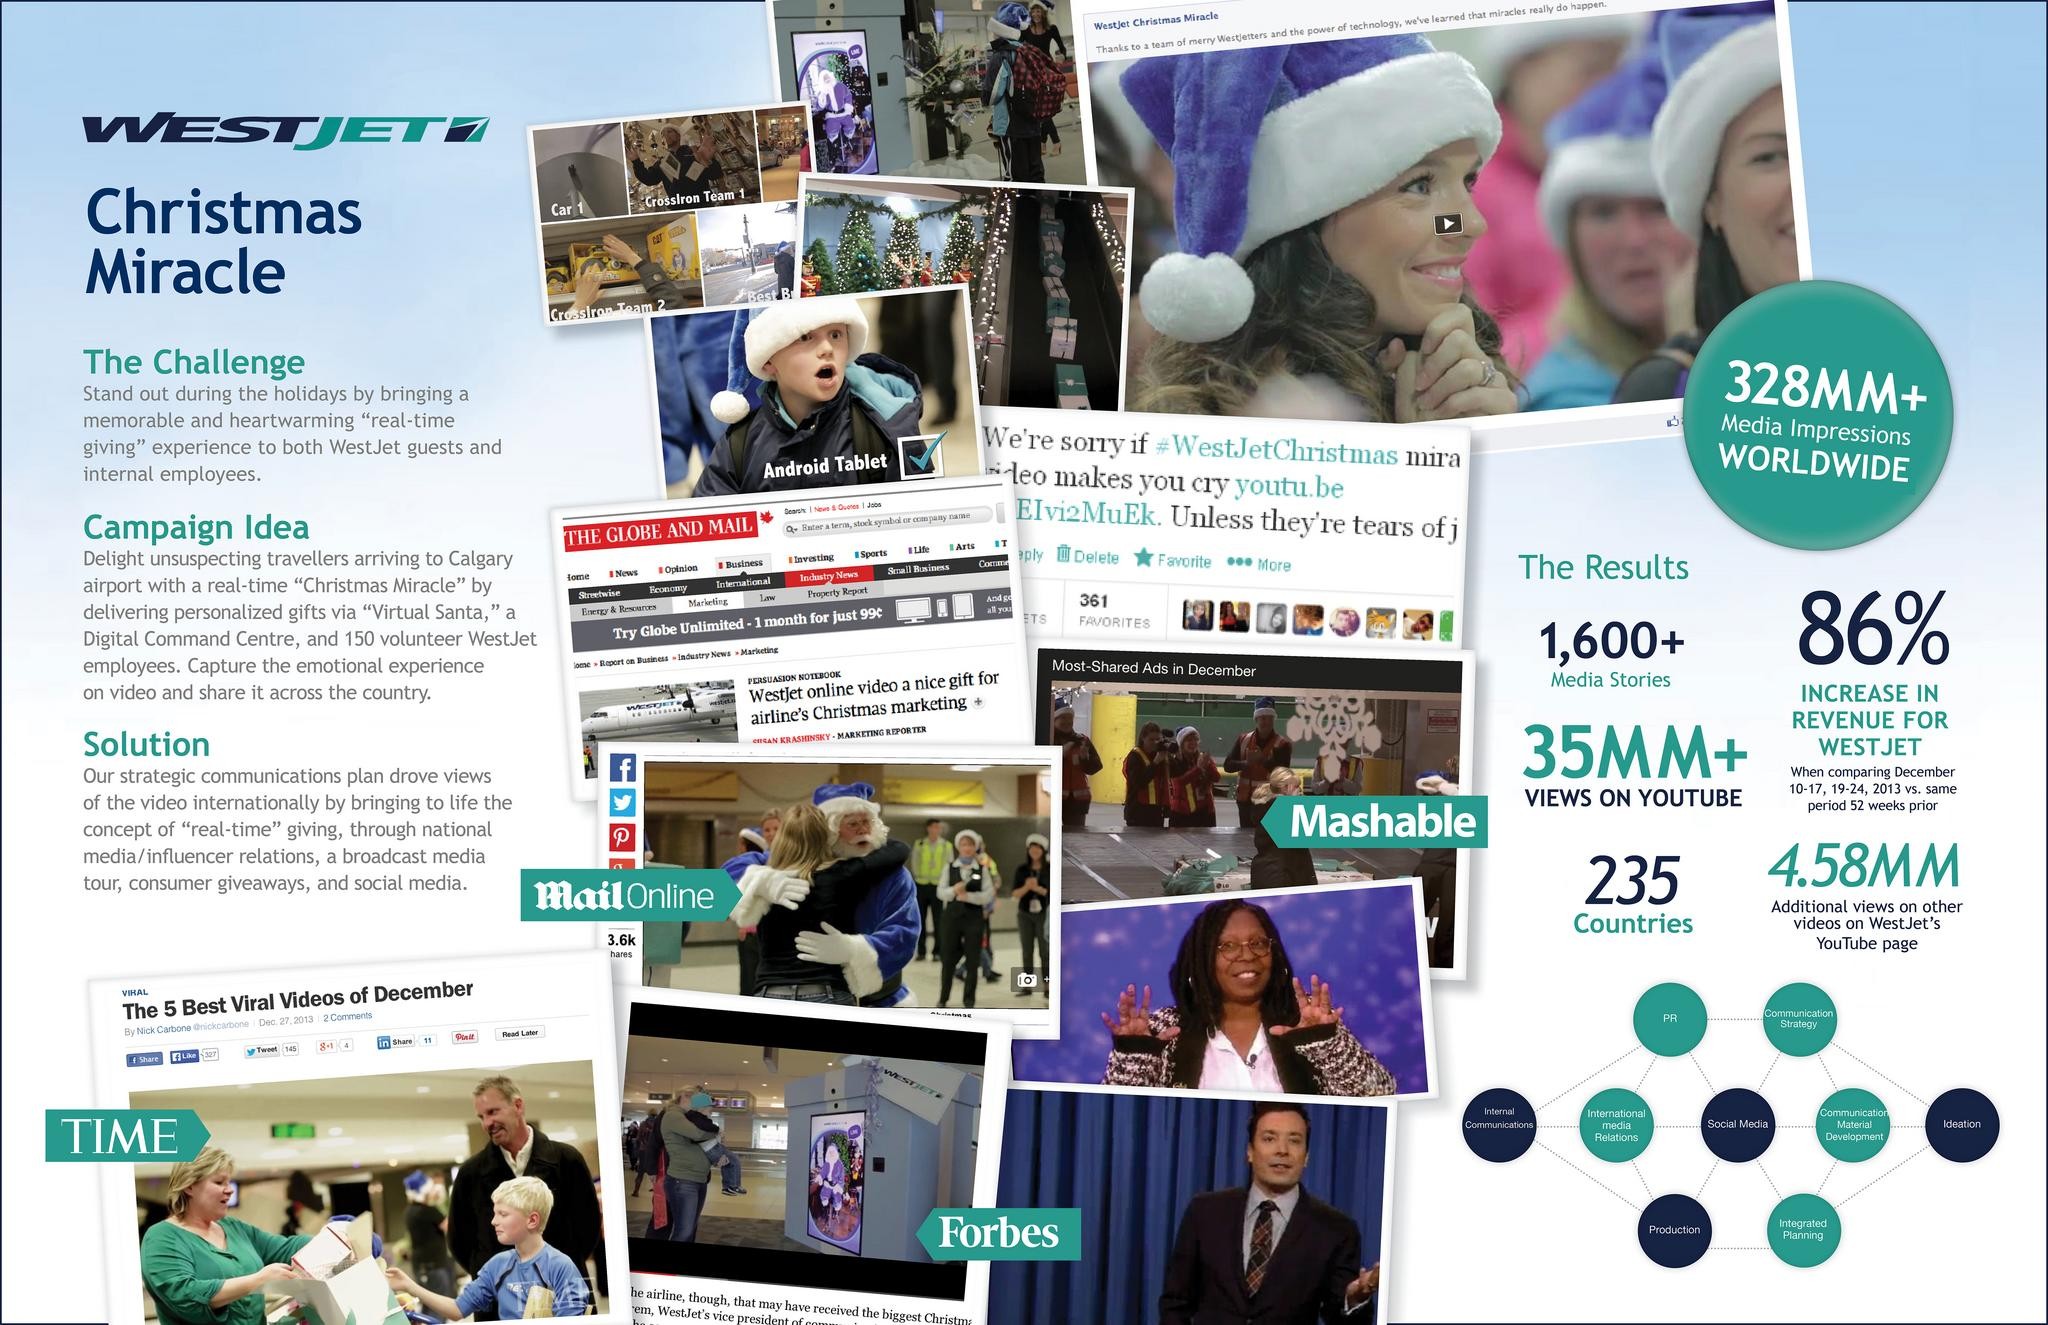 WESTJET CHRISTMAS MIRACLE: REAL-TIME GIVING